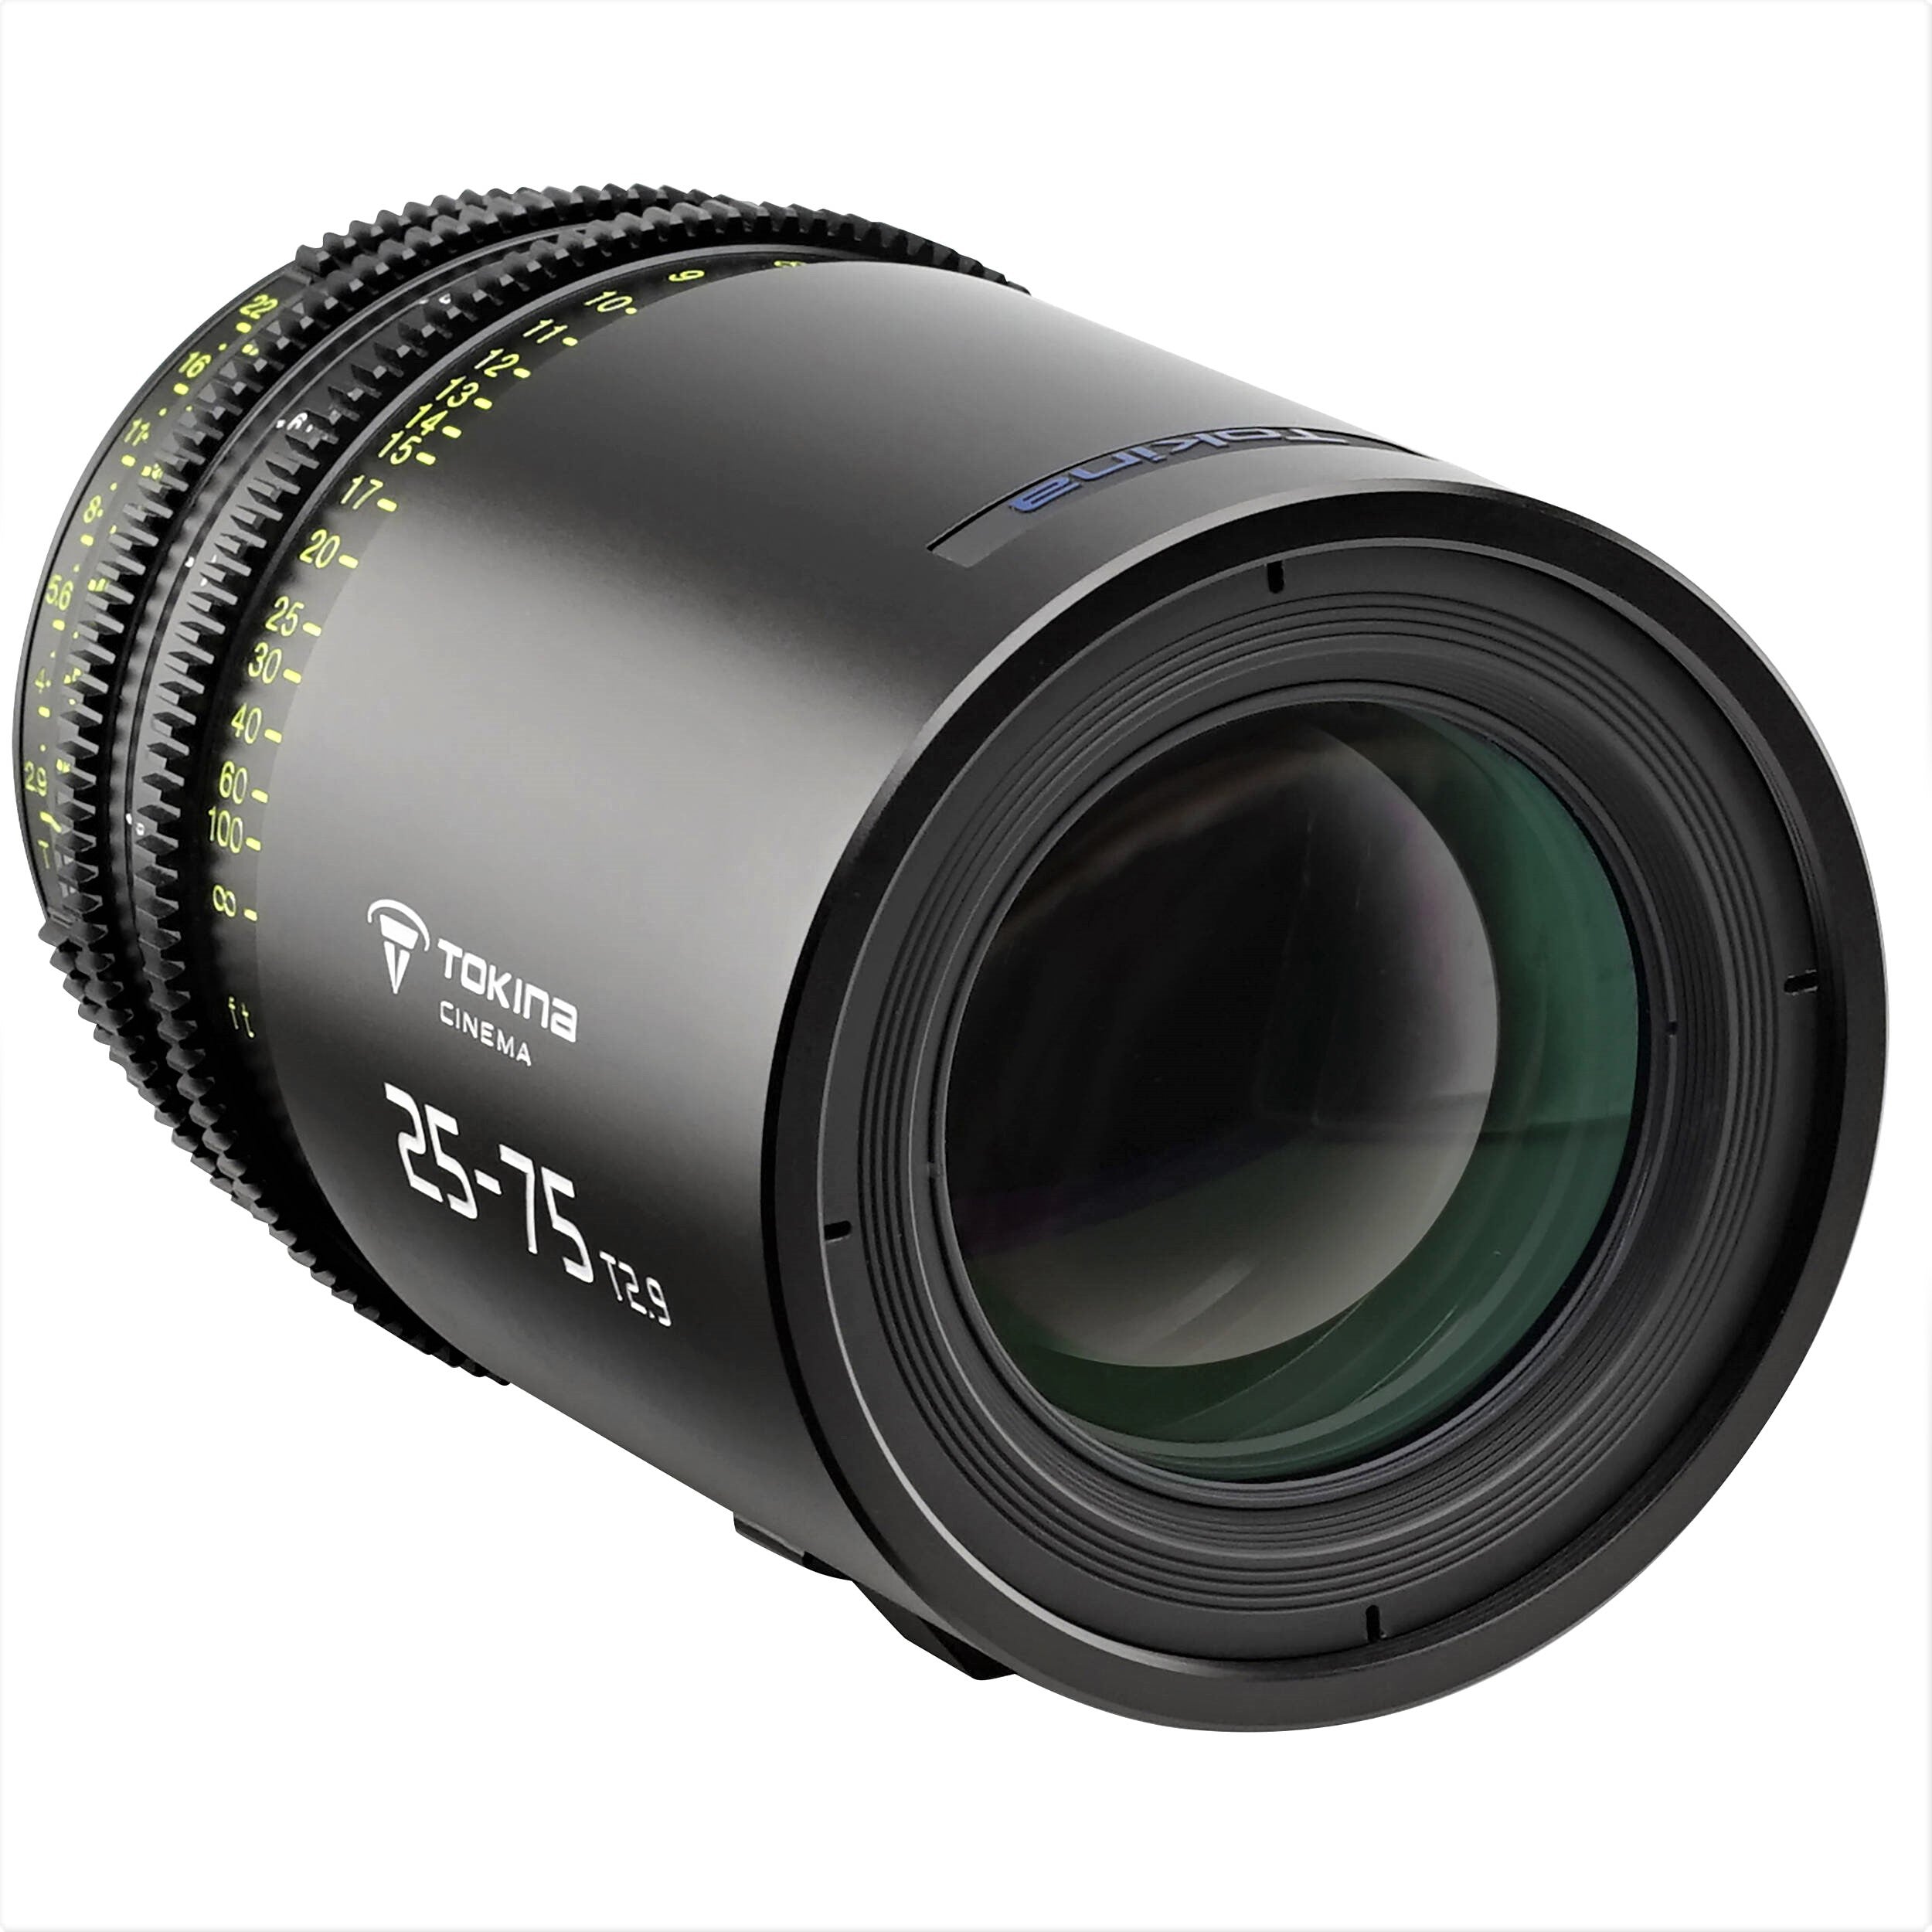 Tokina Cinema 25-75mm T2.9 Lens (Sony E Mount) in a Front-Side View